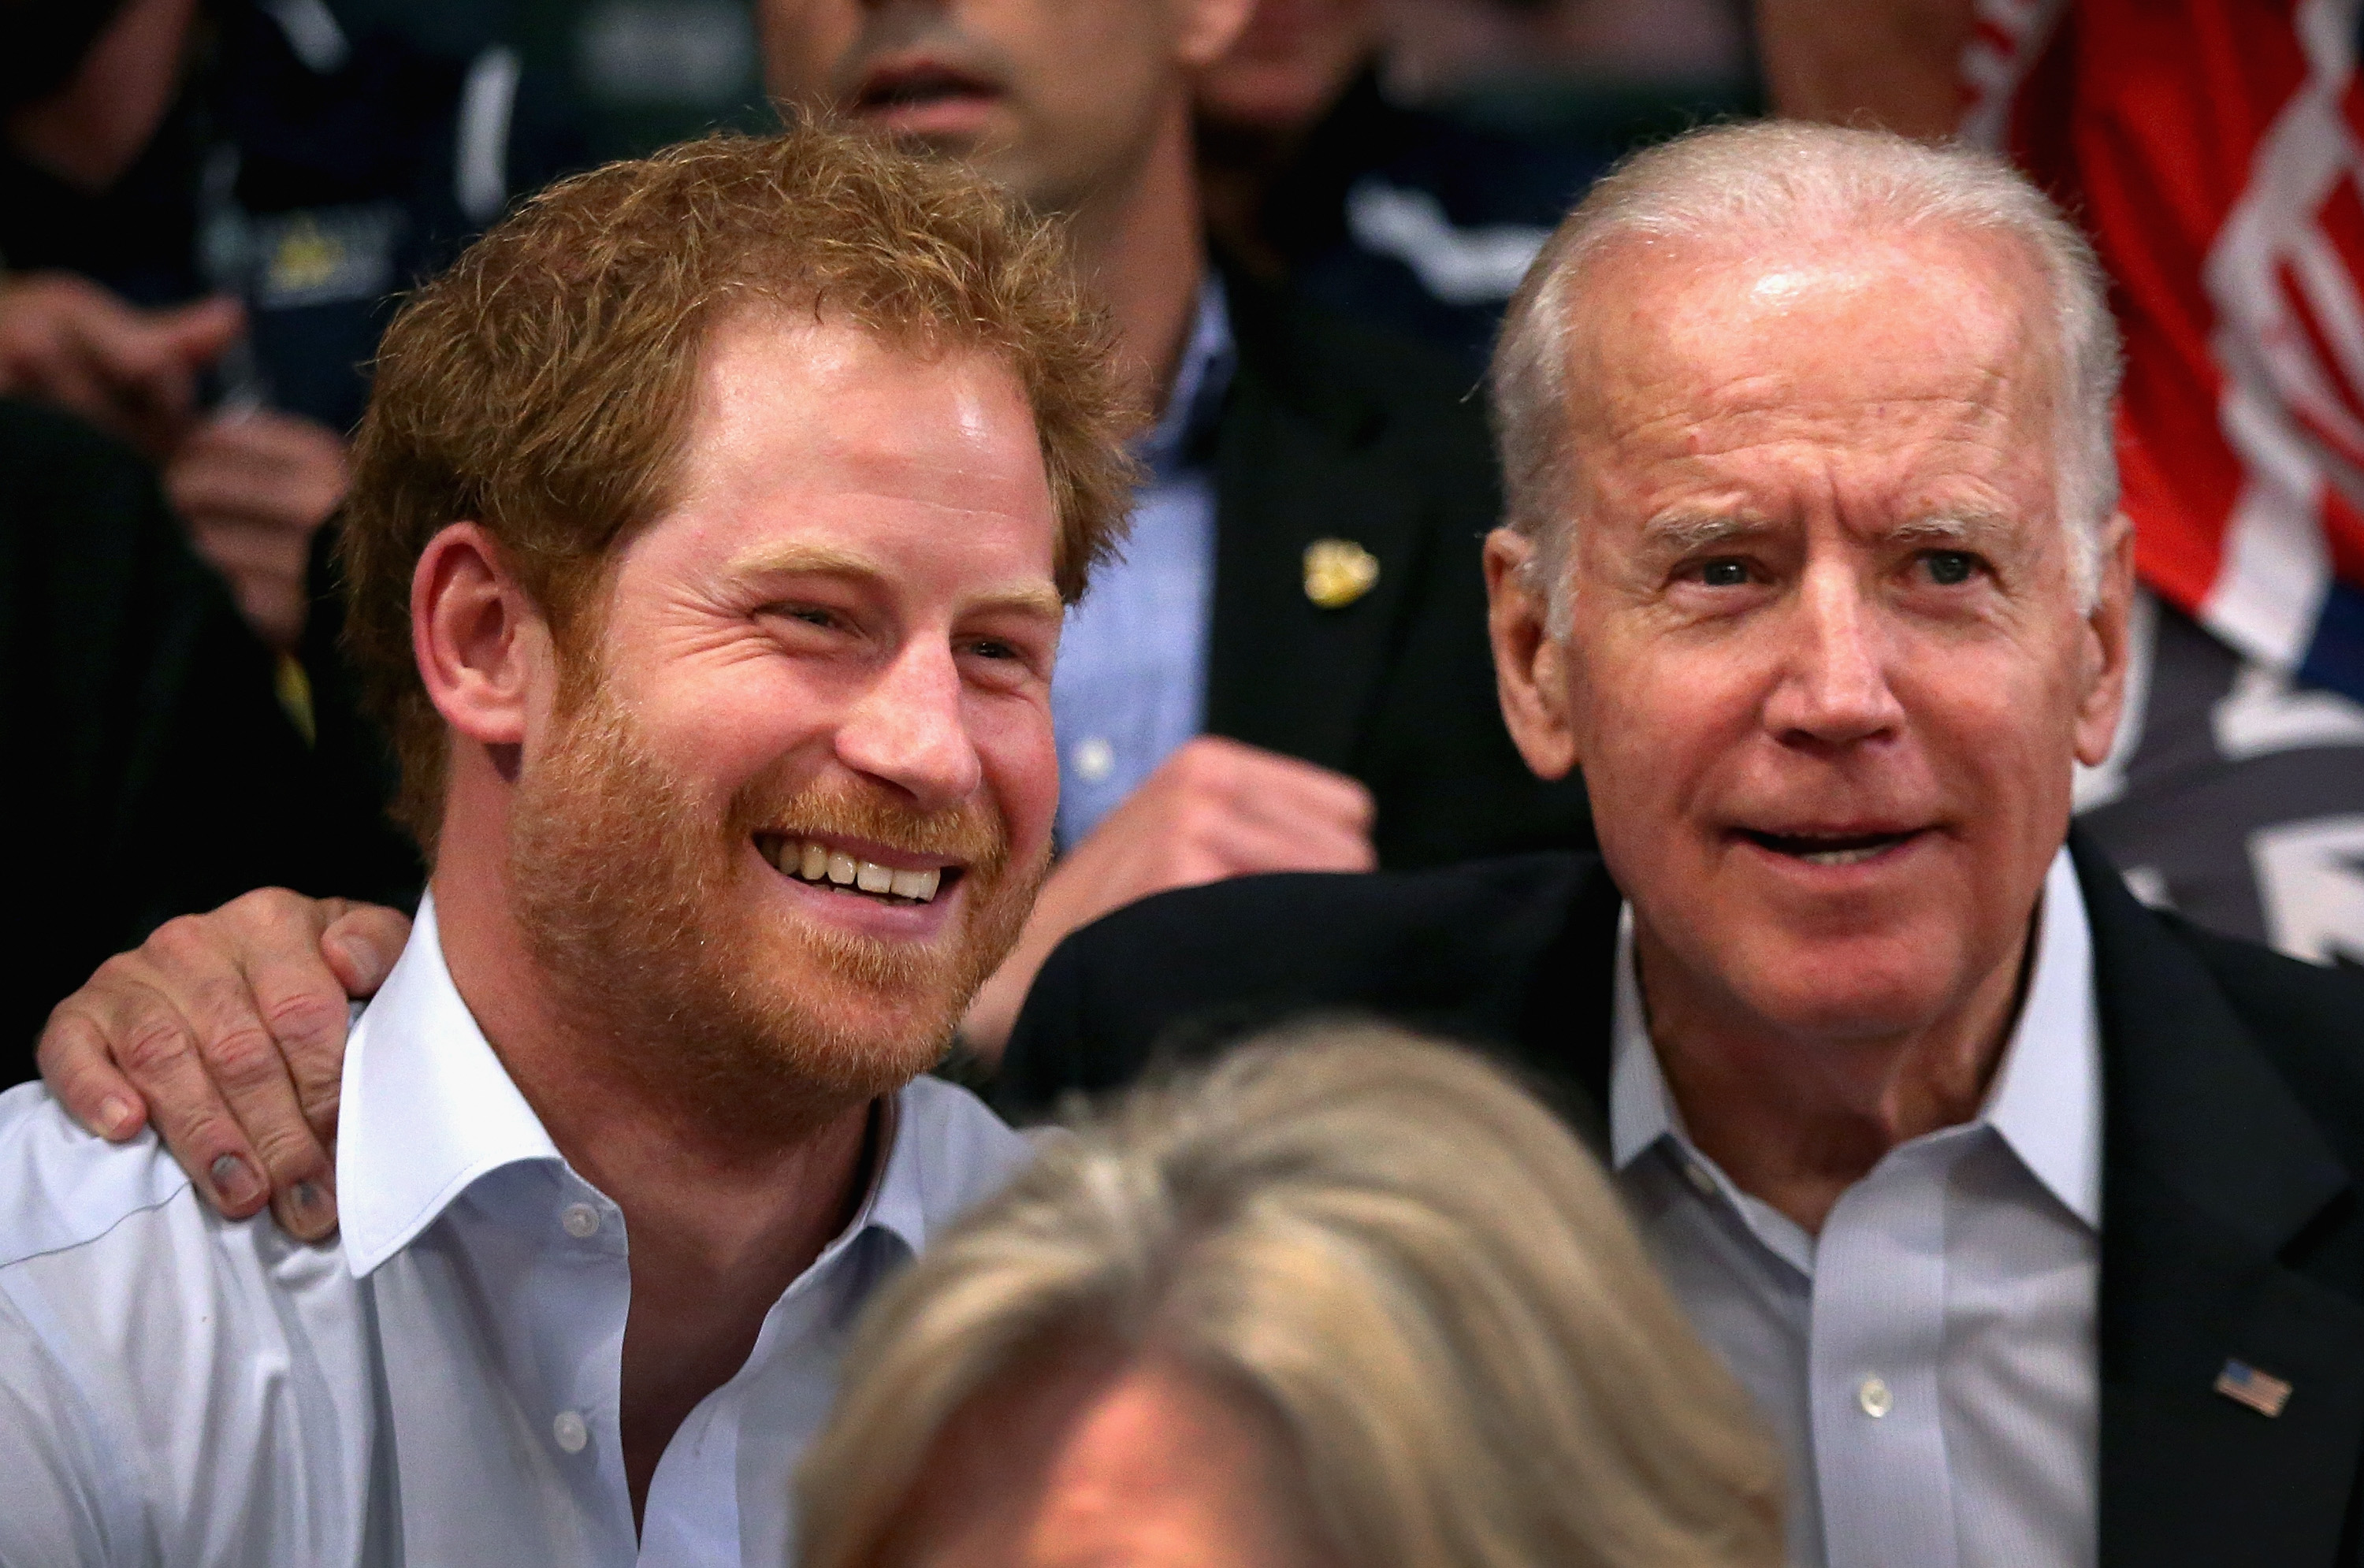 Prince Harry and President of the United States Joe Biden at the Invictus Games in Orlando, Florida on  May 11, 2016 | Source: Getty Images